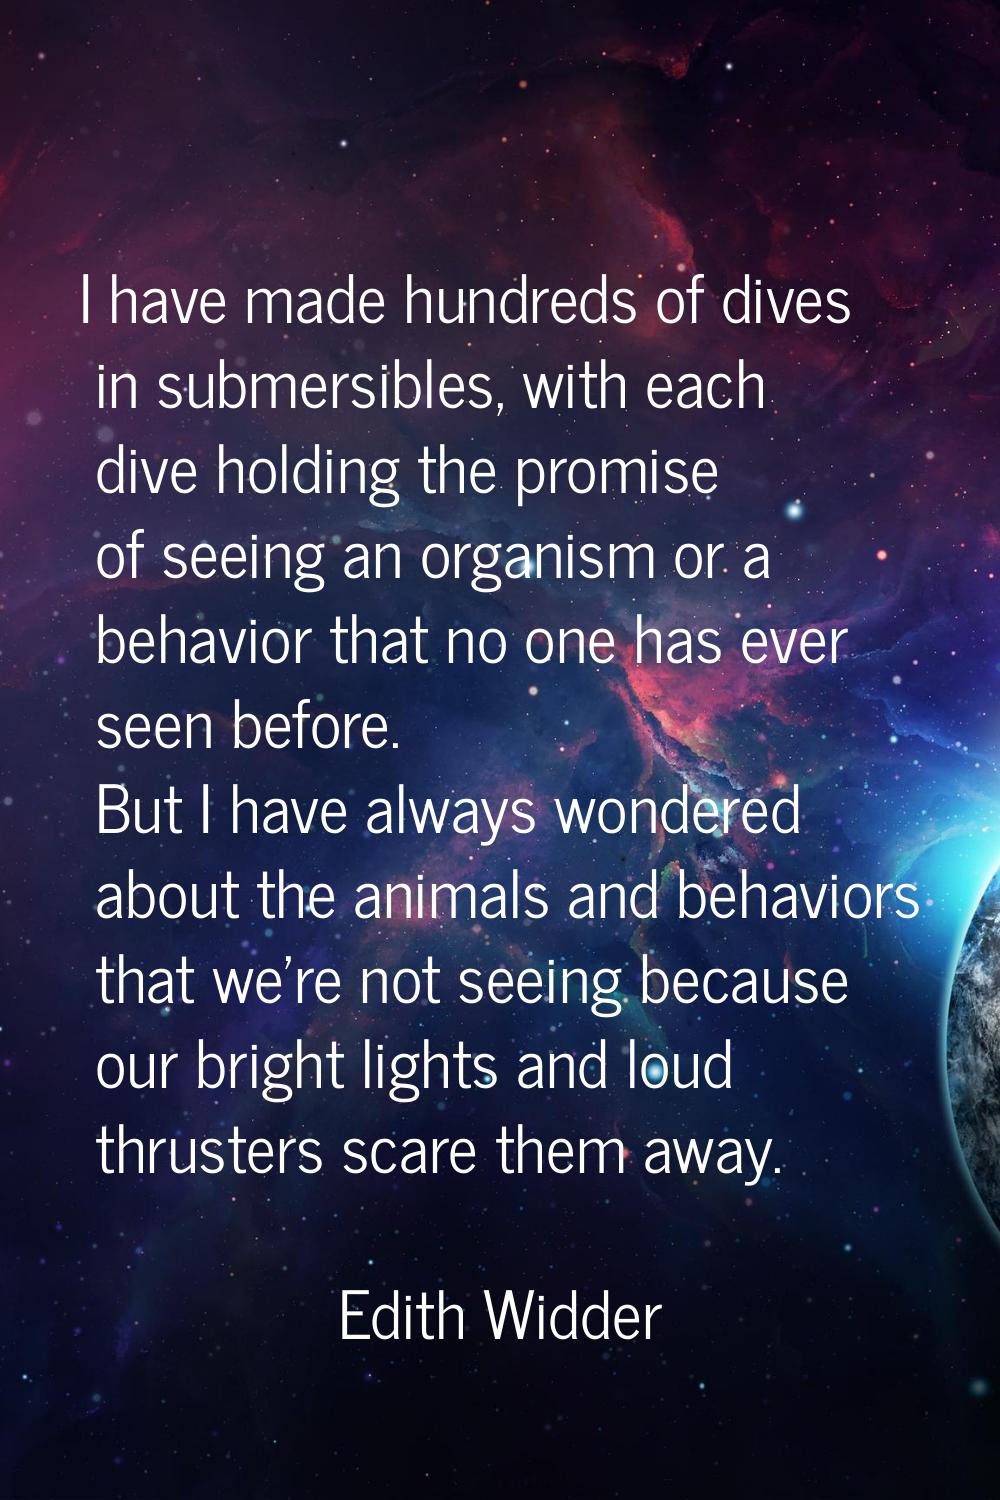 I have made hundreds of dives in submersibles, with each dive holding the promise of seeing an orga